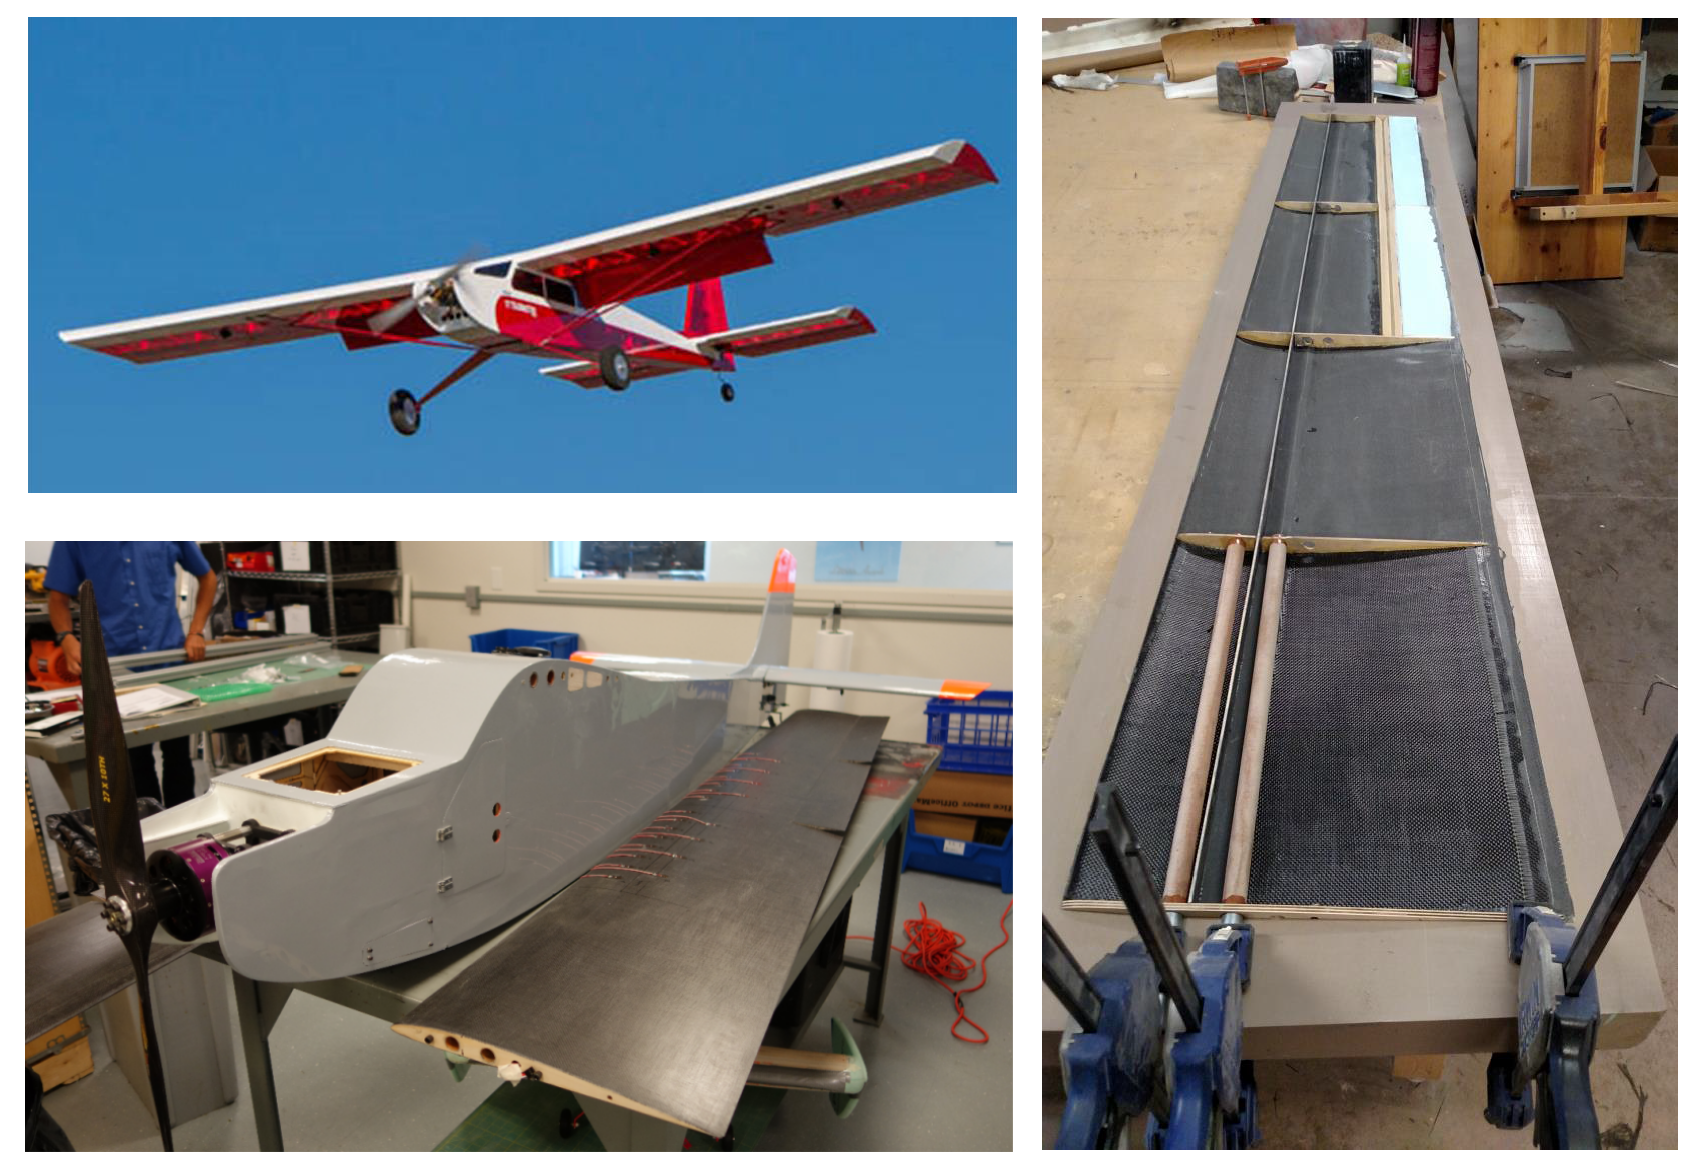 Our flight test vehicle integrates physics-based models and data-driven learning